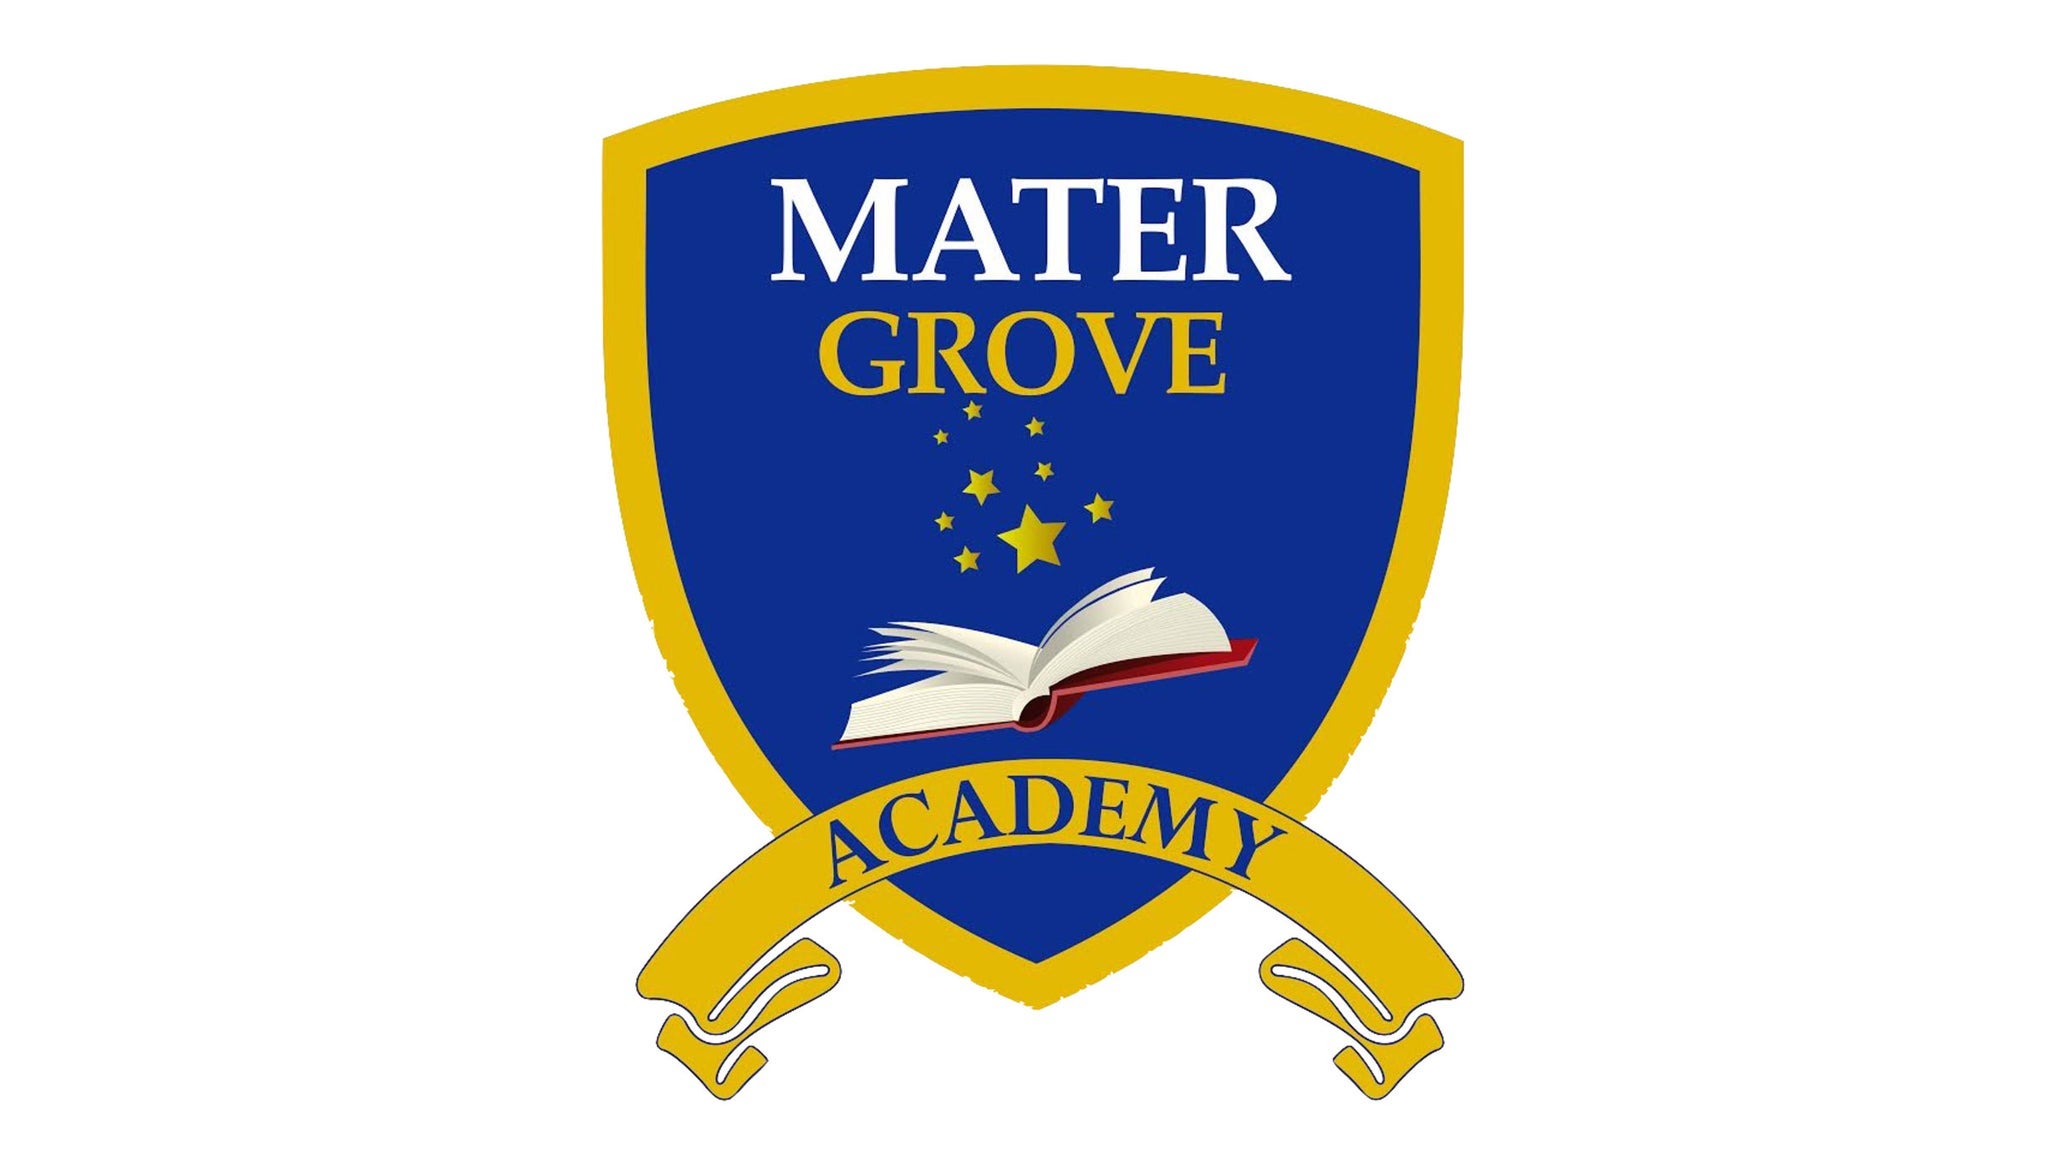 Mater Grove Academy Presents: "Greatest Christmas Story"